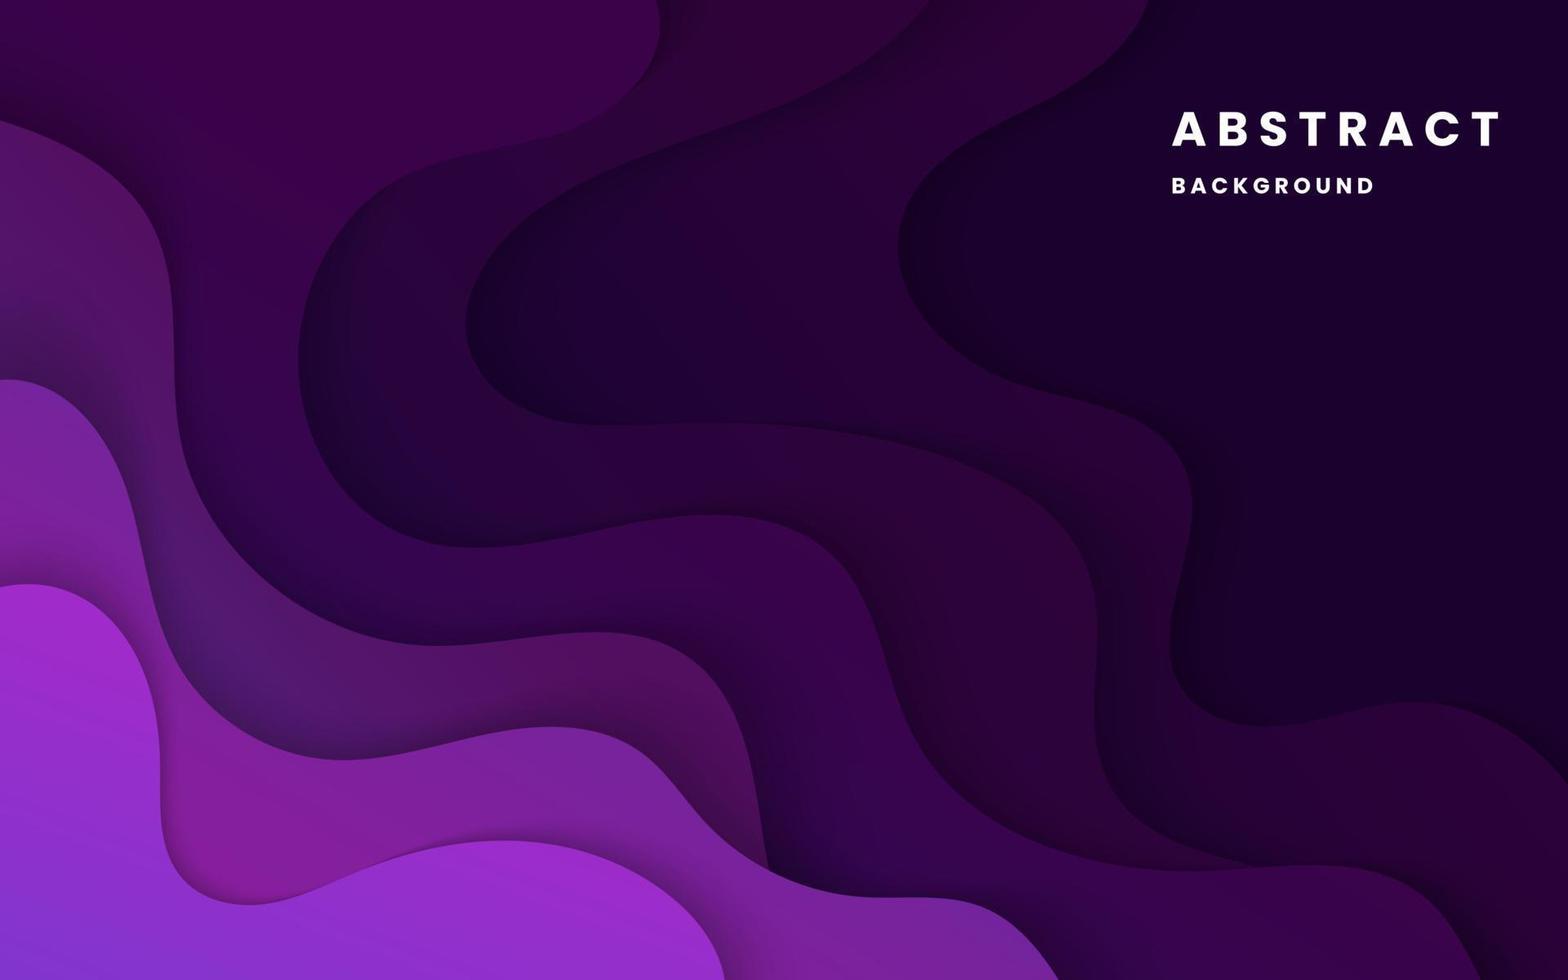 3D liquid abstract background with overlap layer background. purple gradient background dynamic wavy light and shadow. modern elegant design background. illustration vector 10 eps.